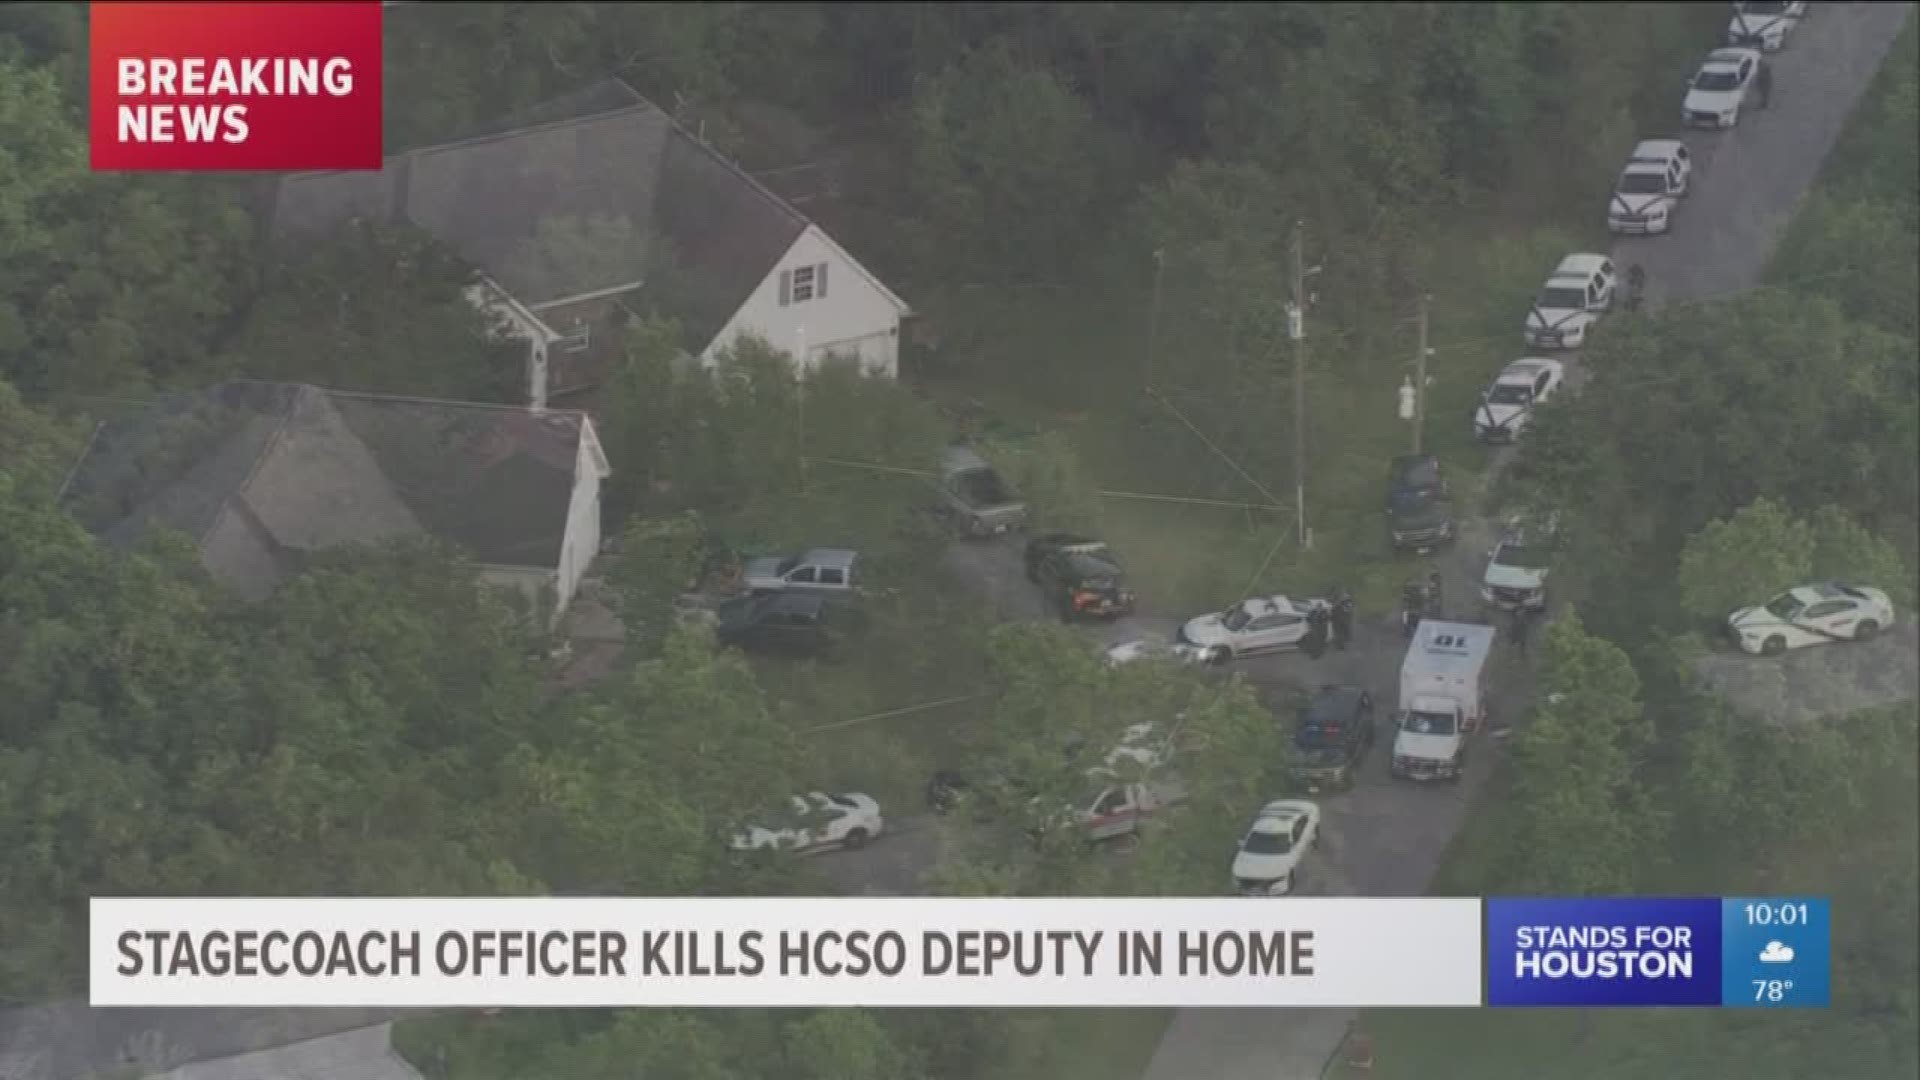 It was originally reported as a home invasion at the residence of a Stagecoach police officer. The officer shot the man, but investigators say the two men were brothers and this was likely a domestic dispute.